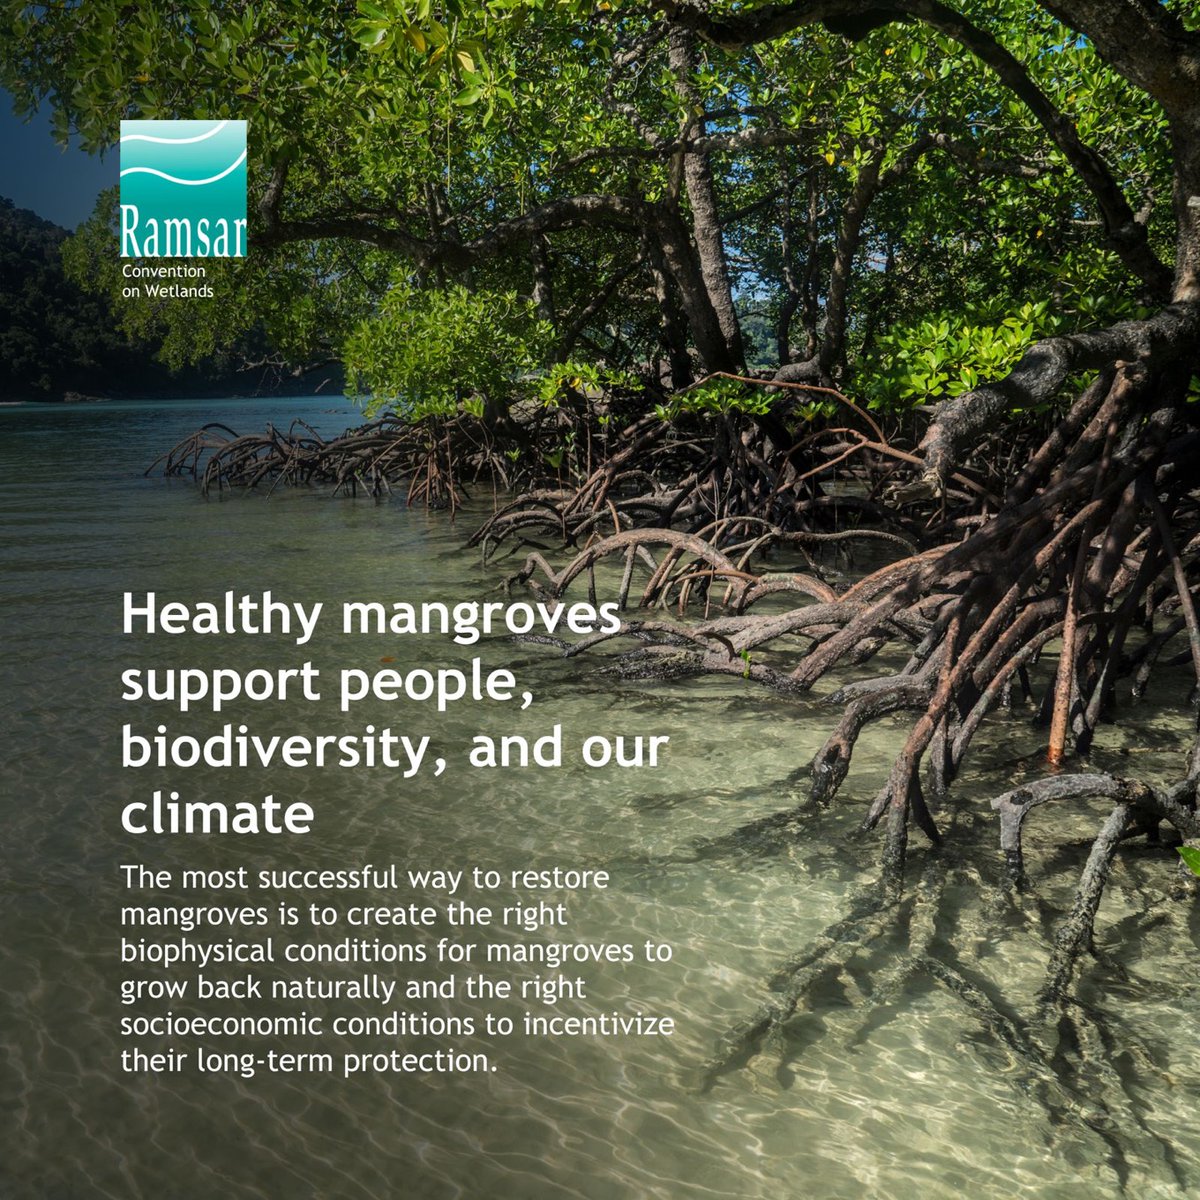 Mangroves support the livelihoods and wellbeing of hundreds of millions of coastal inhabitants around the world, provide food security, sequester and store large quantities of carbon, regulate water quality, and protect the coast.

➡️ mangrovealliance.org/best-practice-…